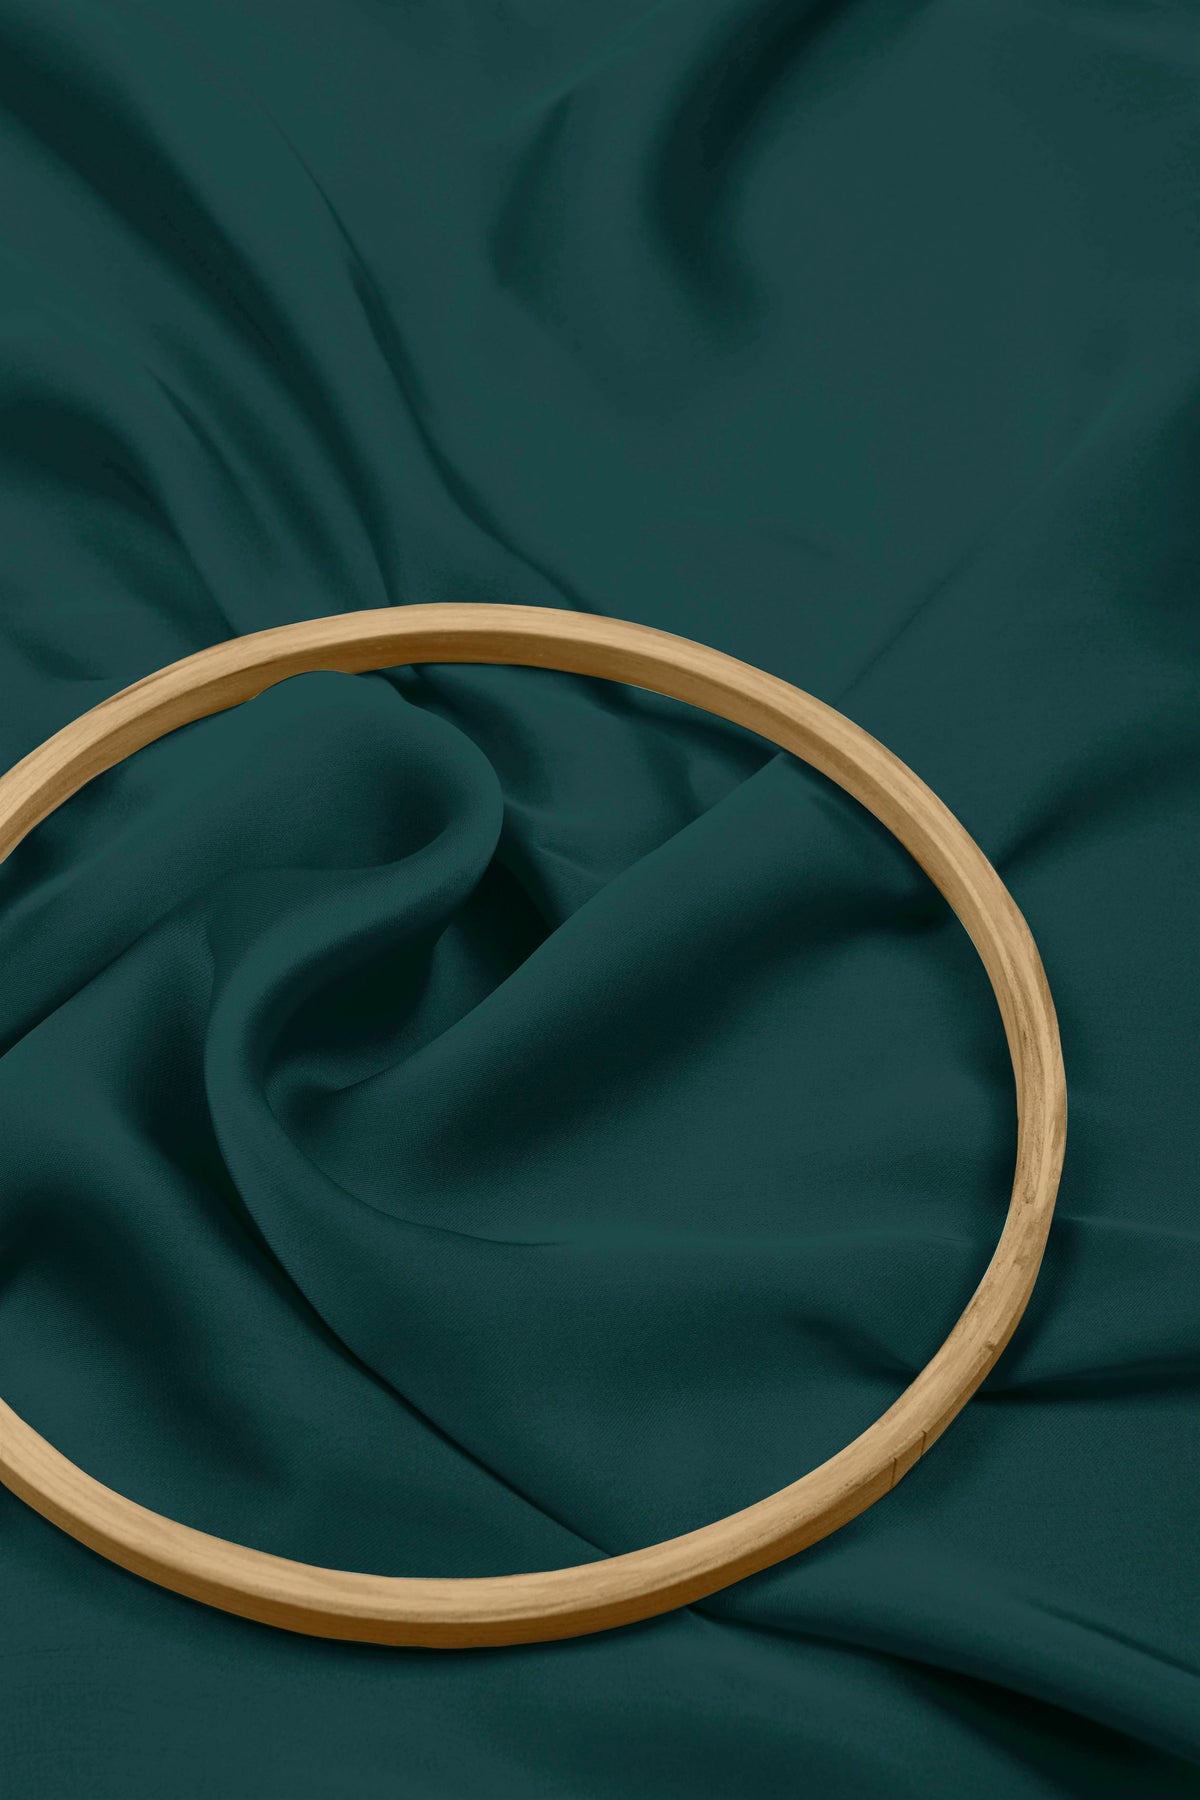 Cationic Pine Green Plain Dyed Satin Georgette Fabric